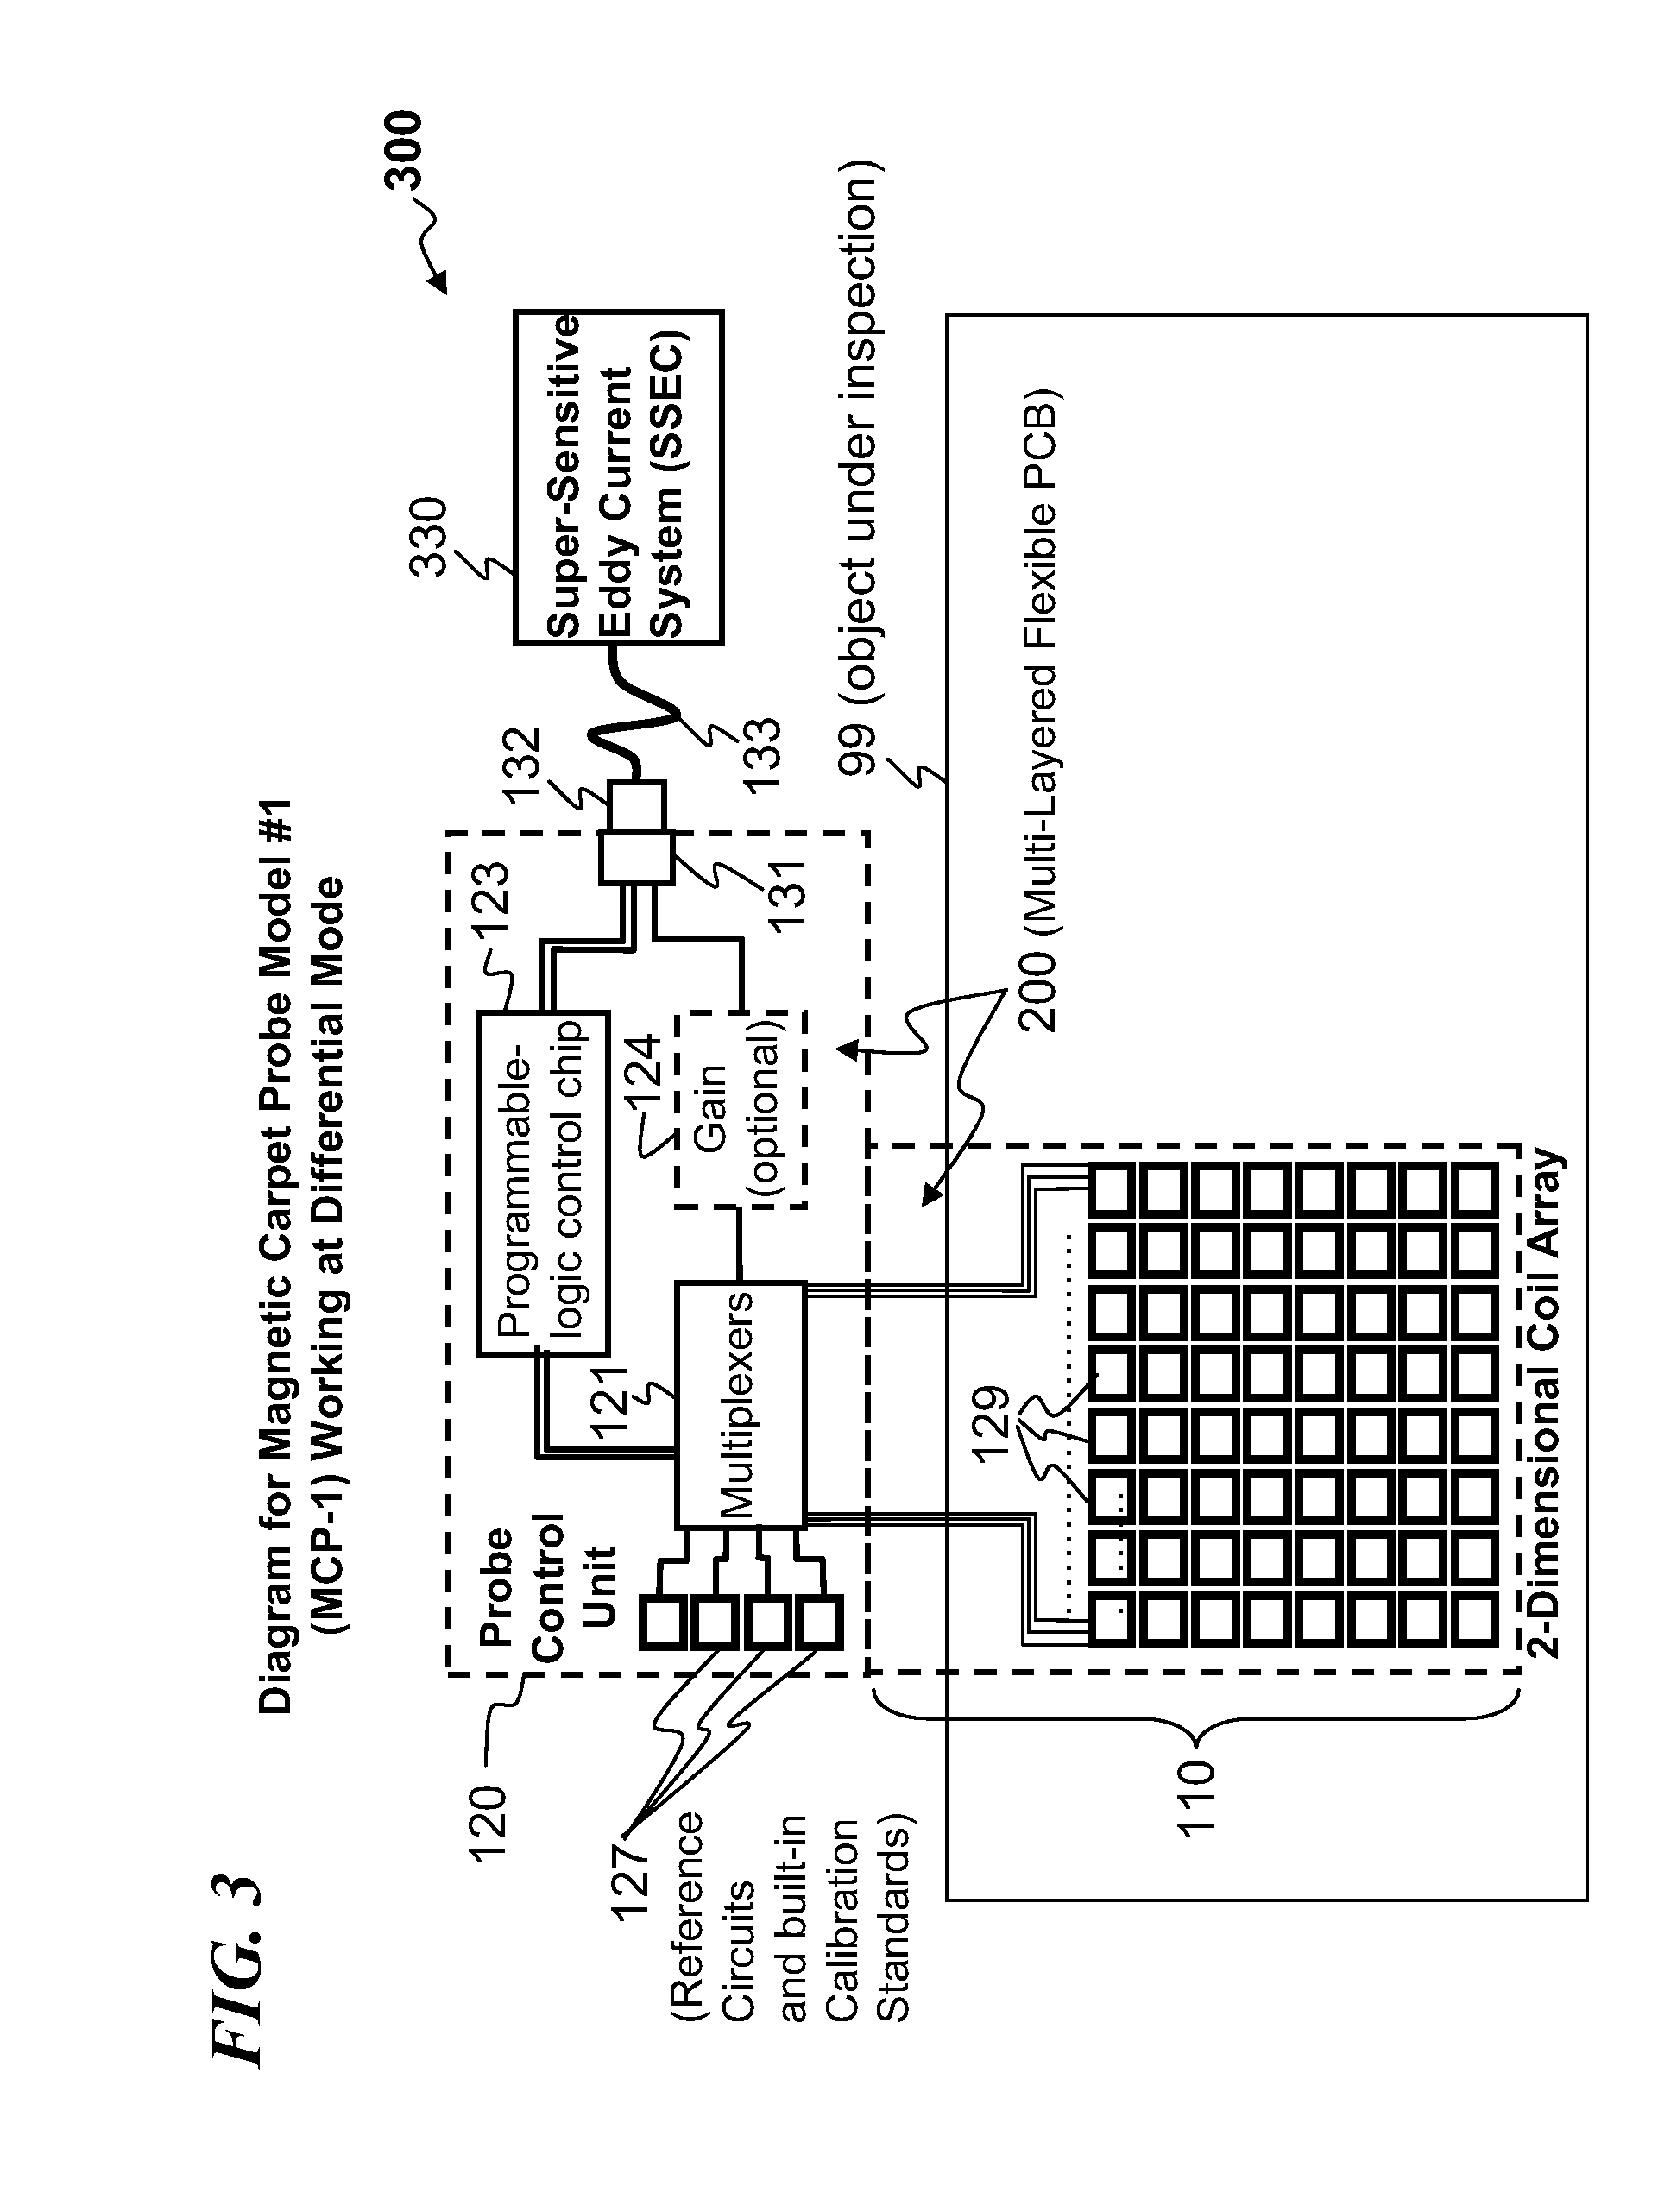 Apparatus and method for eddy-current scanning of a surface to detect cracks and other defects